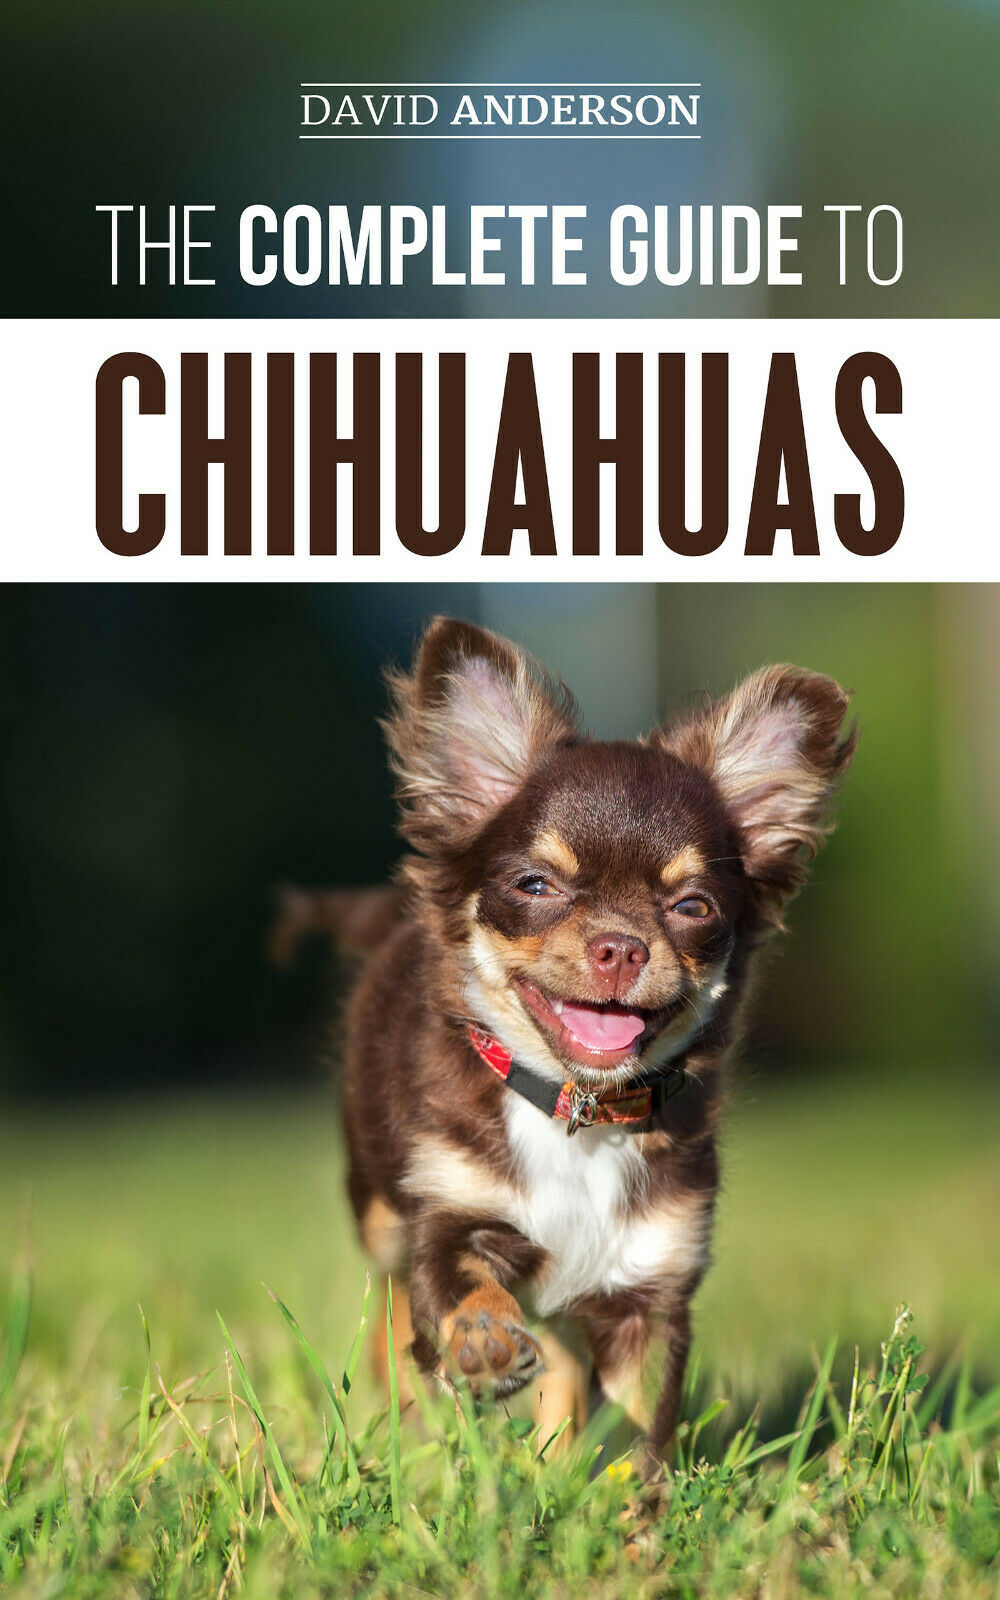 The Complete Guide To Chihuahuas: - Dog Training Guide Book - Paperback 2019